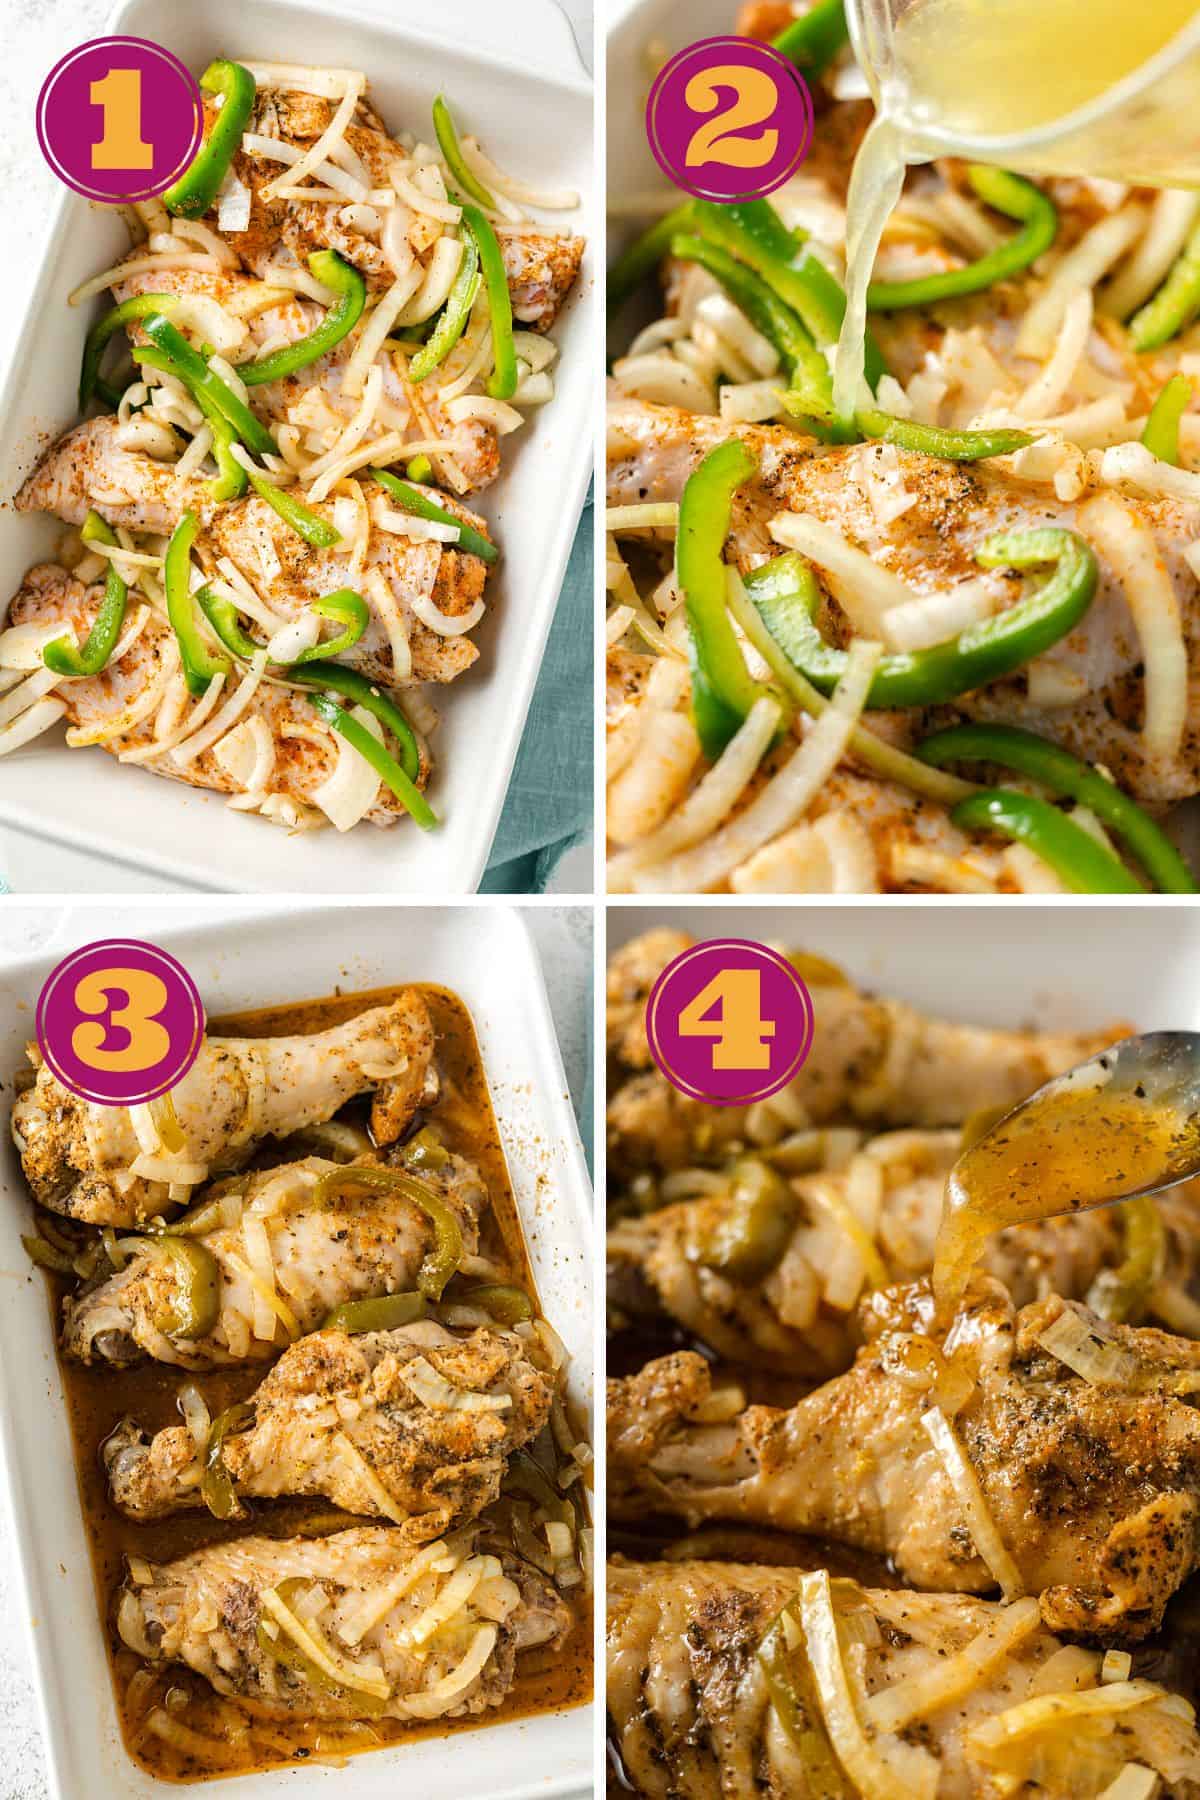 Four numbered pictures: first, raw turkey wings in a baking dish with raw peppers and onions; second, a pyrex of chicken broth being poured over the chicken, peppers, and onions; third, an overhead view of four cooked turkey wings in a baking dish; and fourth, a close up of four turkey wings in a baking dish